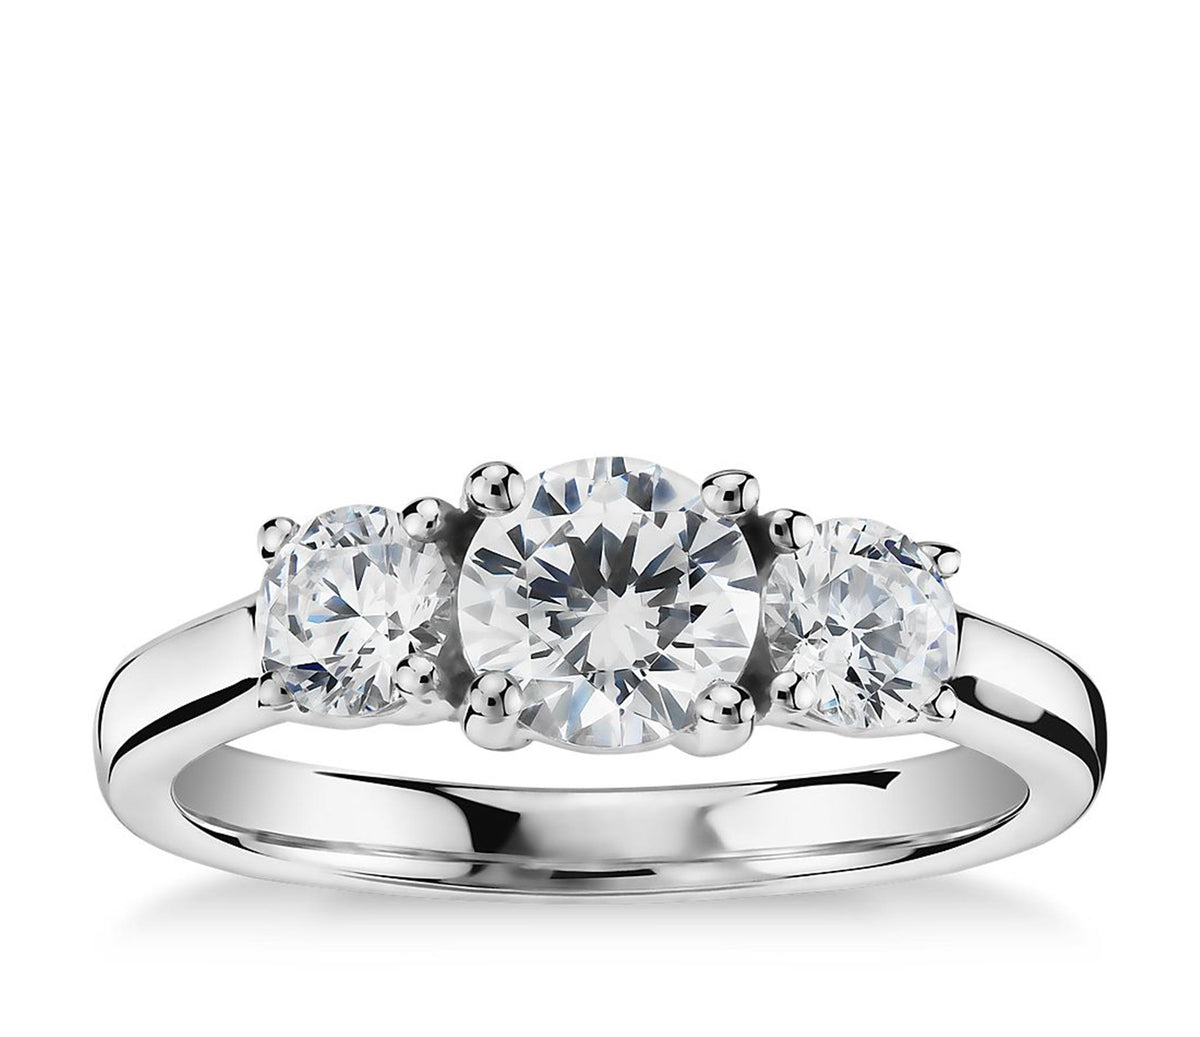 18Kt White Gold Three-Stone Ring With .80cttw Natural Diamonds